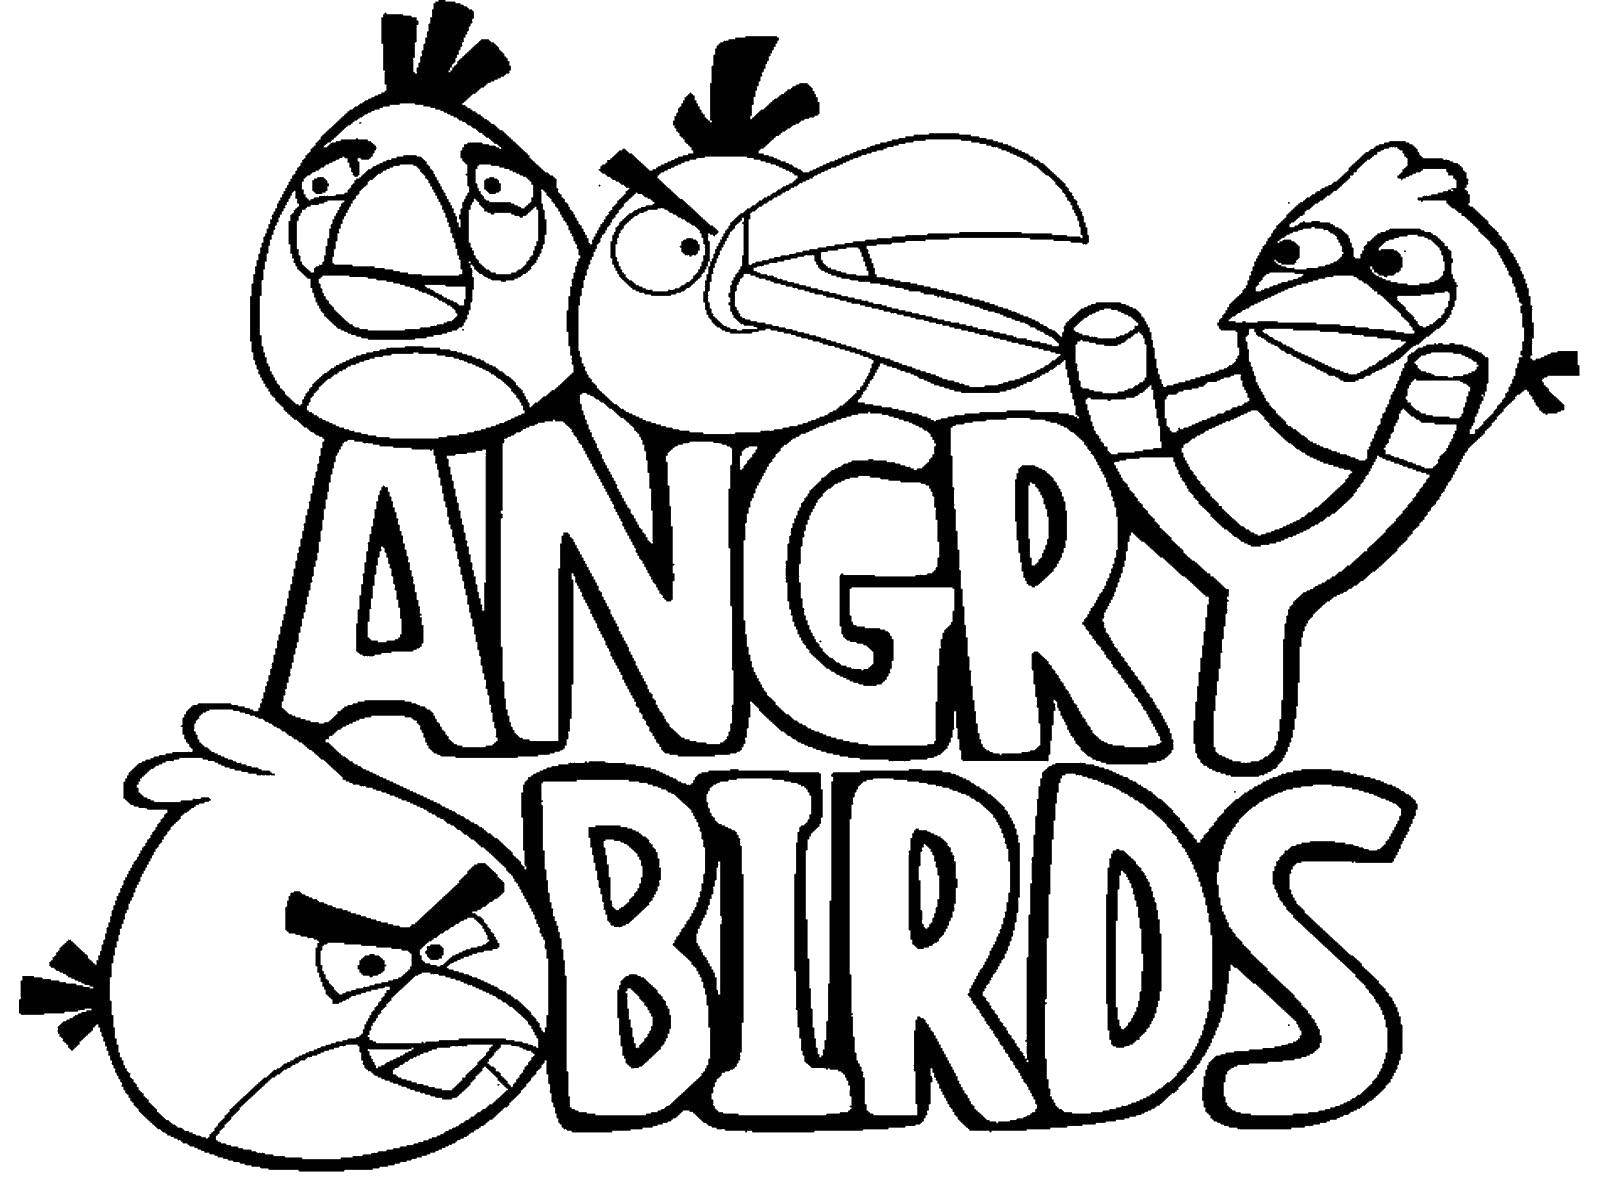 Coloring Birds from the game. Category cartoons. Tags:  games, angry birds.